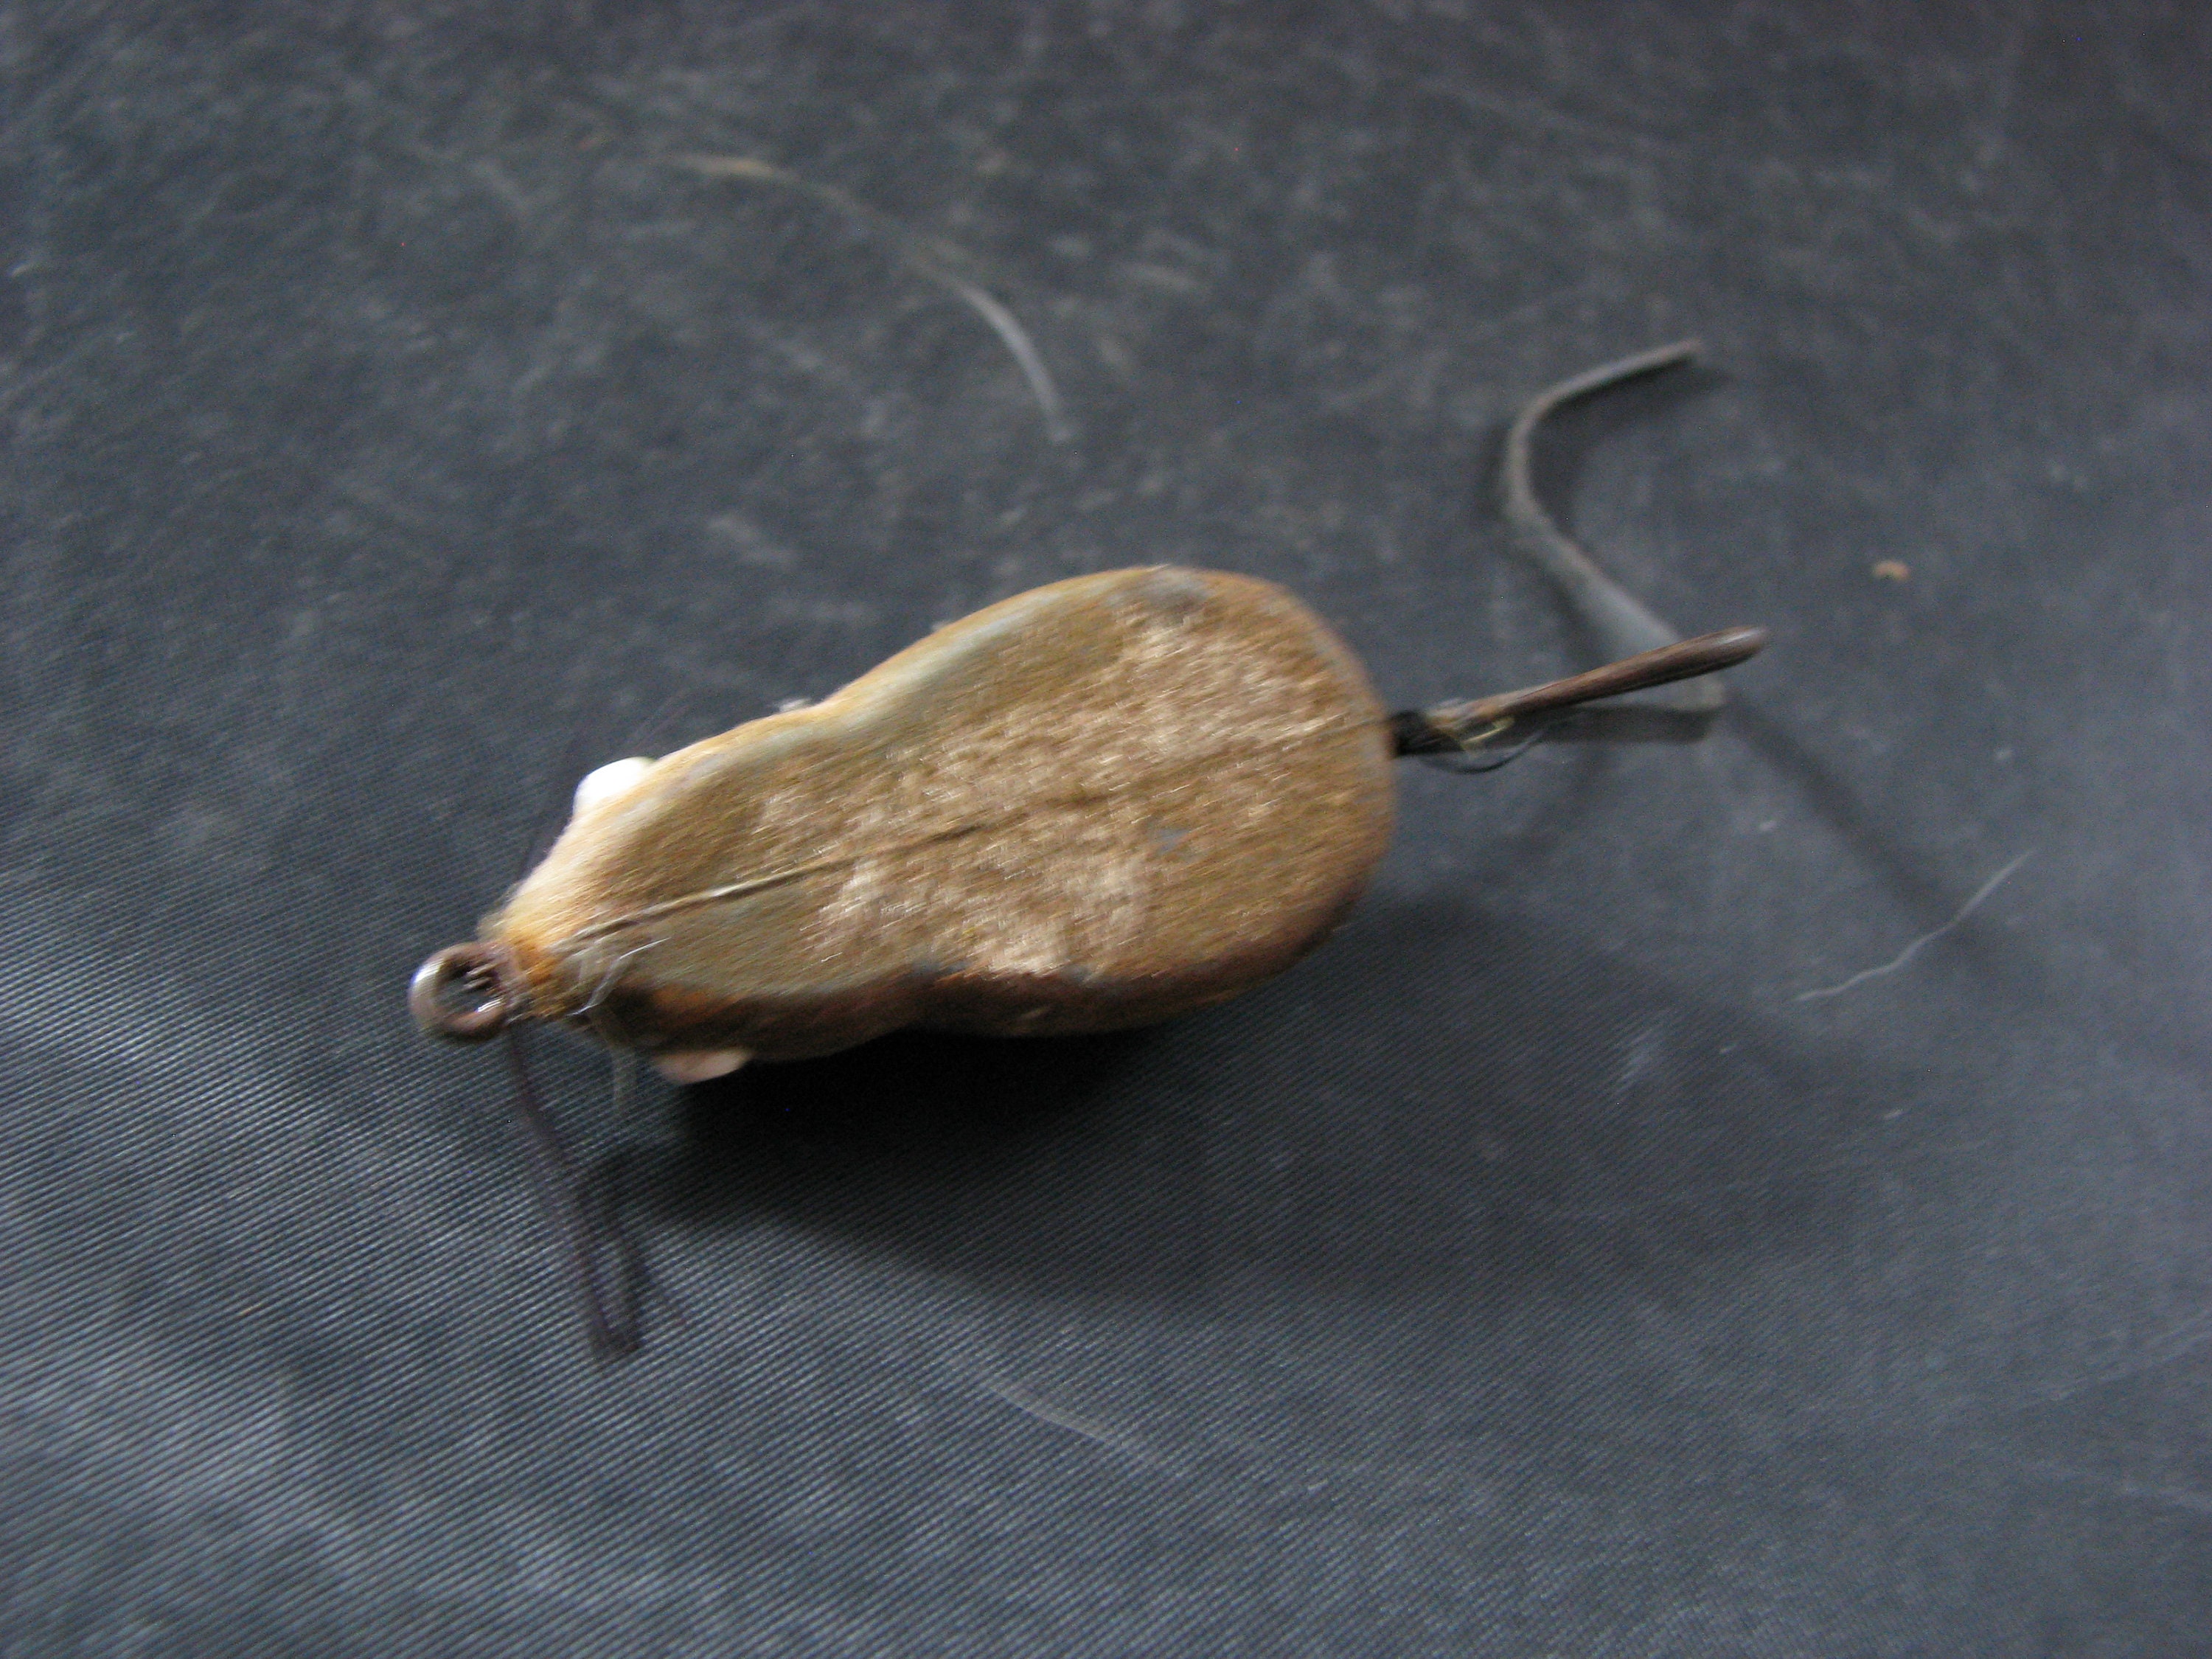 Vintage Mouse Fishing Lure 